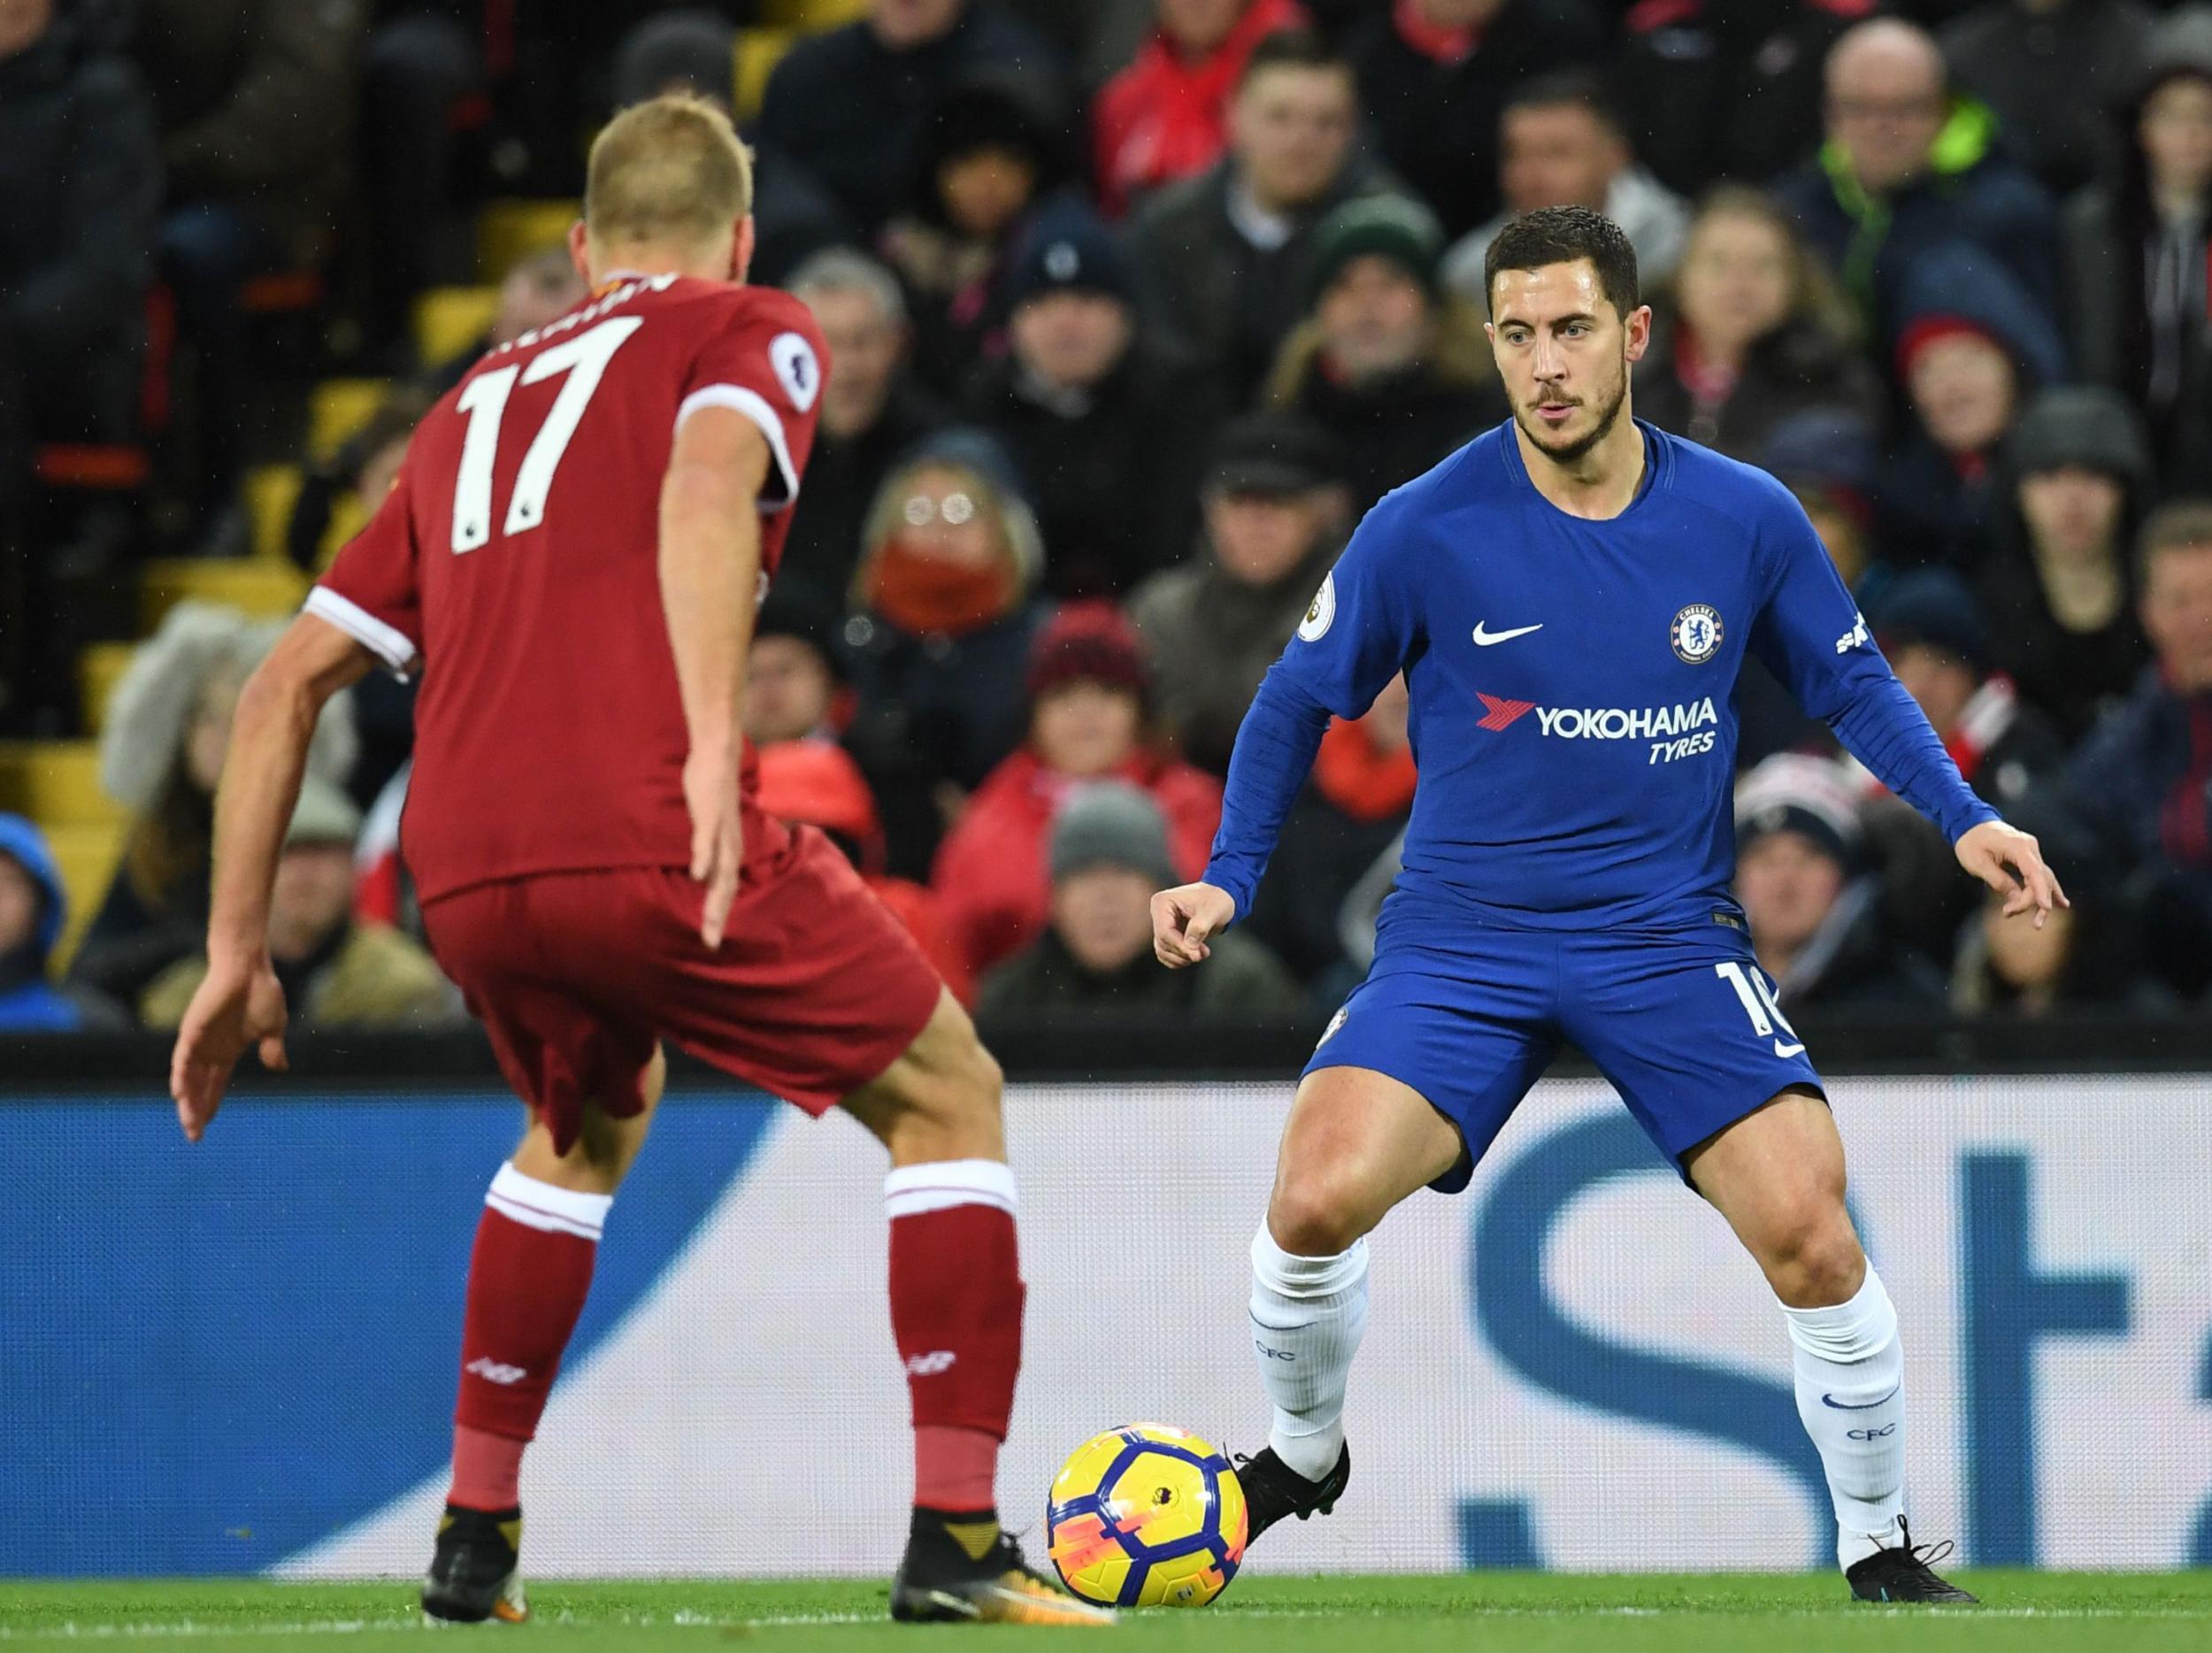 Dazzling Eden Hazard reminds Liverpool what they wish they had in Philippe Coutinho after Chelsea draw